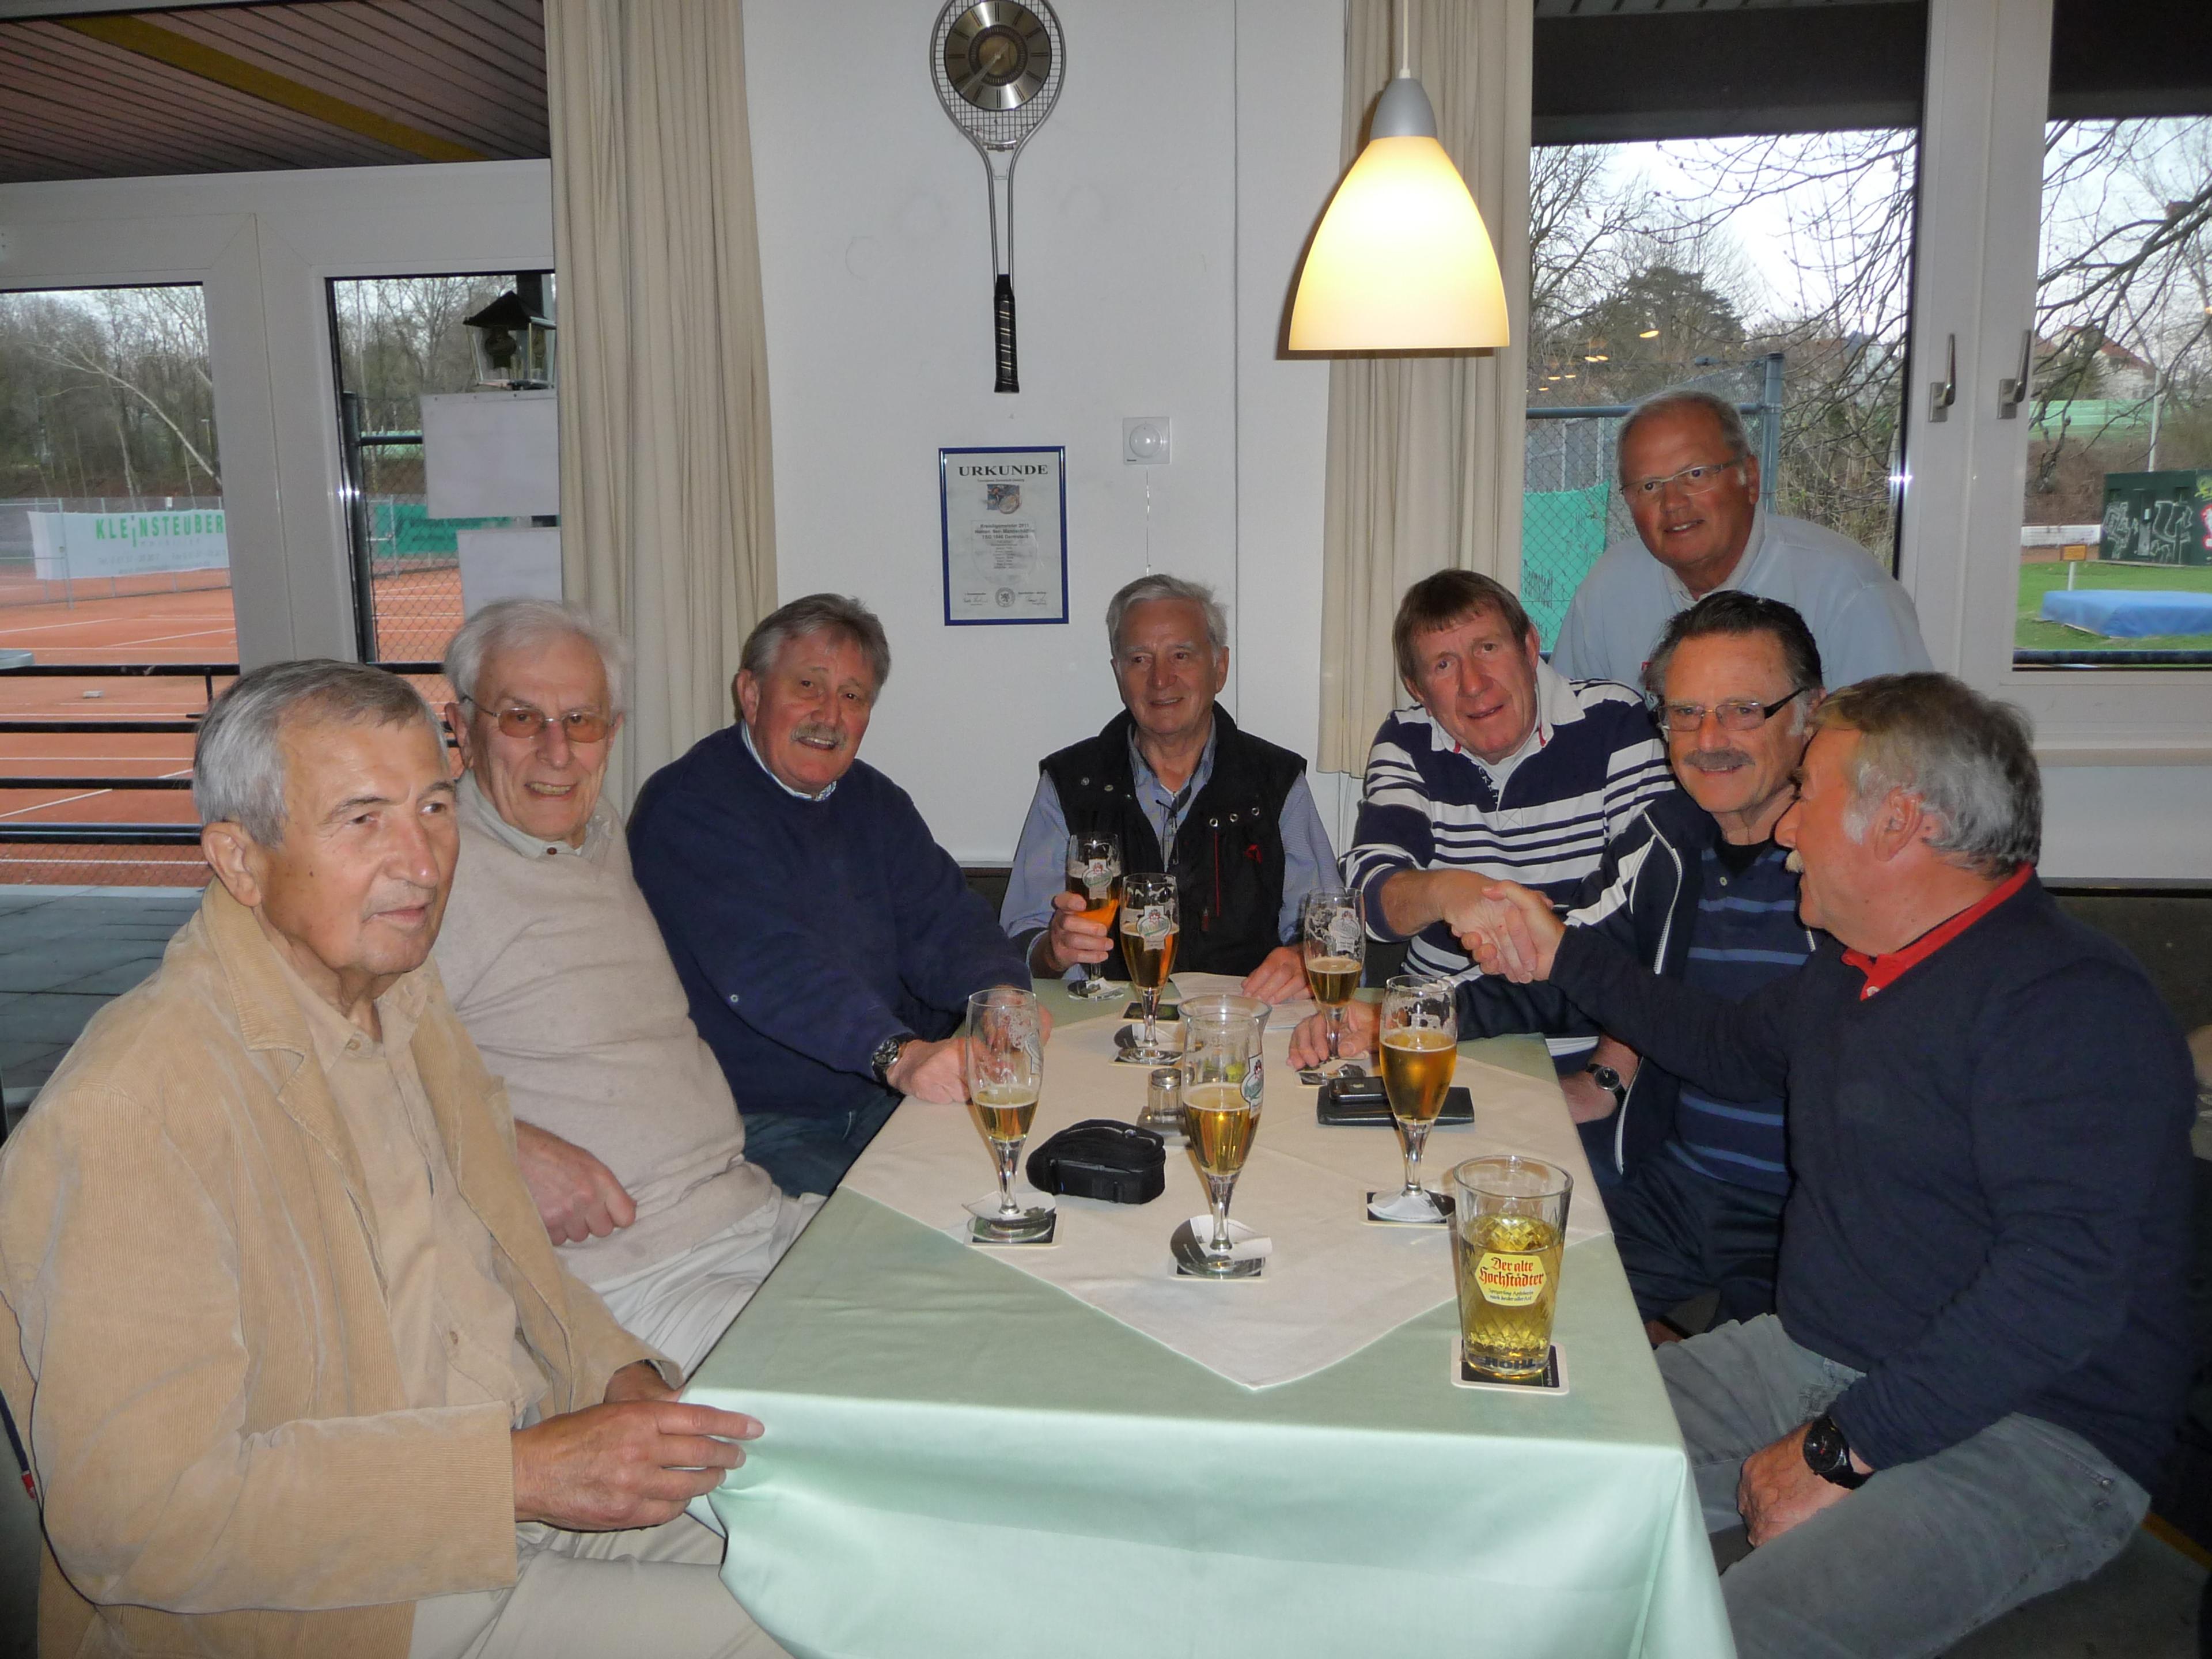 A get together with his tennis partners in 2012